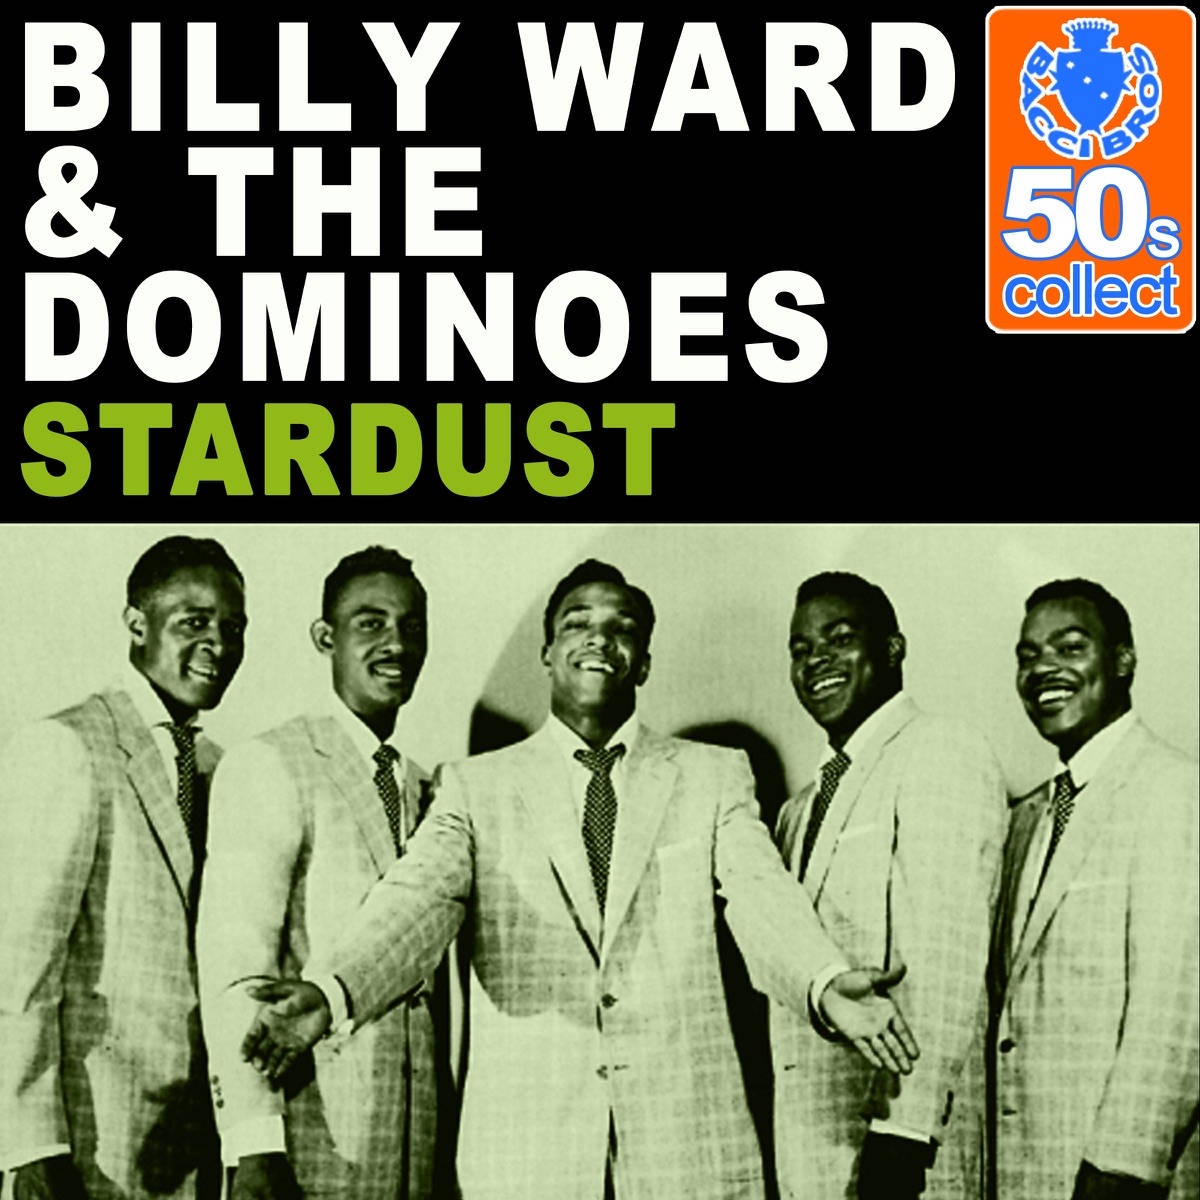 Billy Ward And The Dominoes Stardust Album Wallpaper